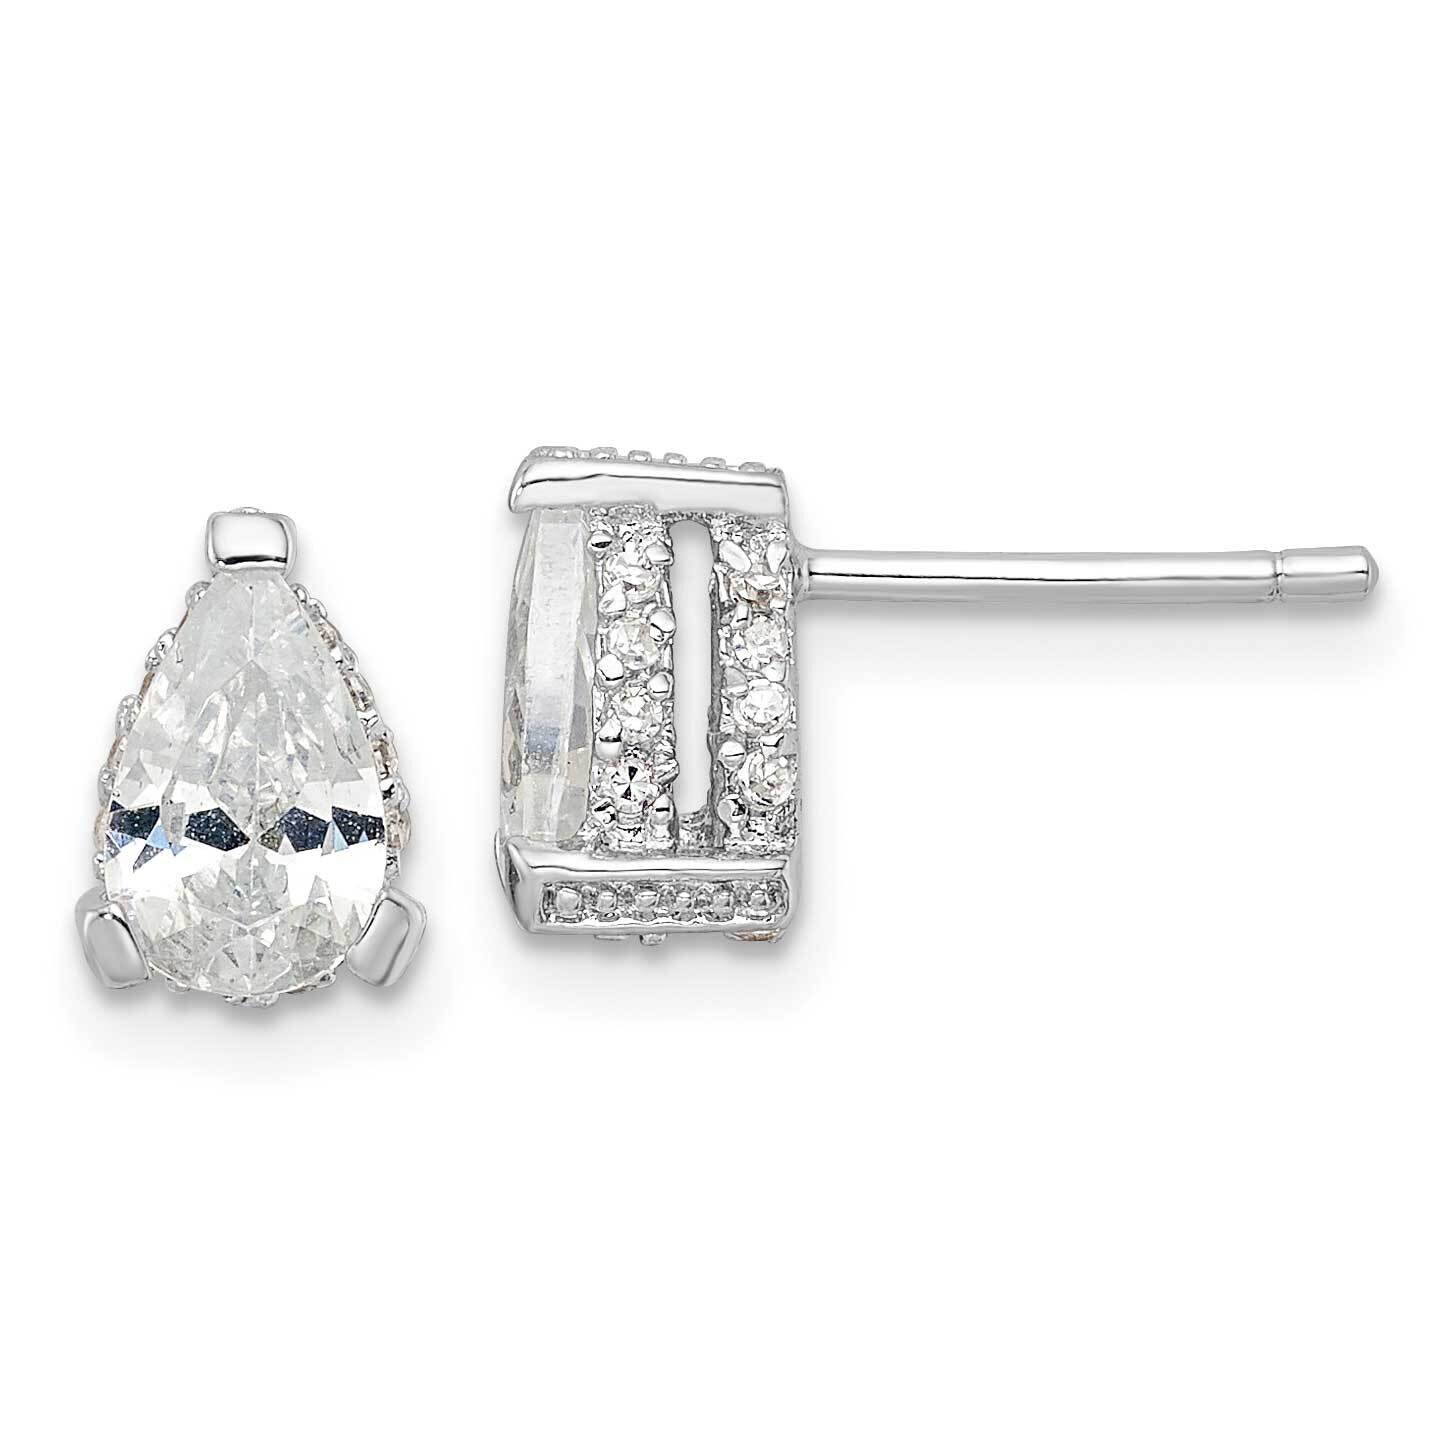 Cheryl M CZ Diamond Pear with Pave Gallery Stud Earrings Sterling Silver Rhodium-plated QCM1463